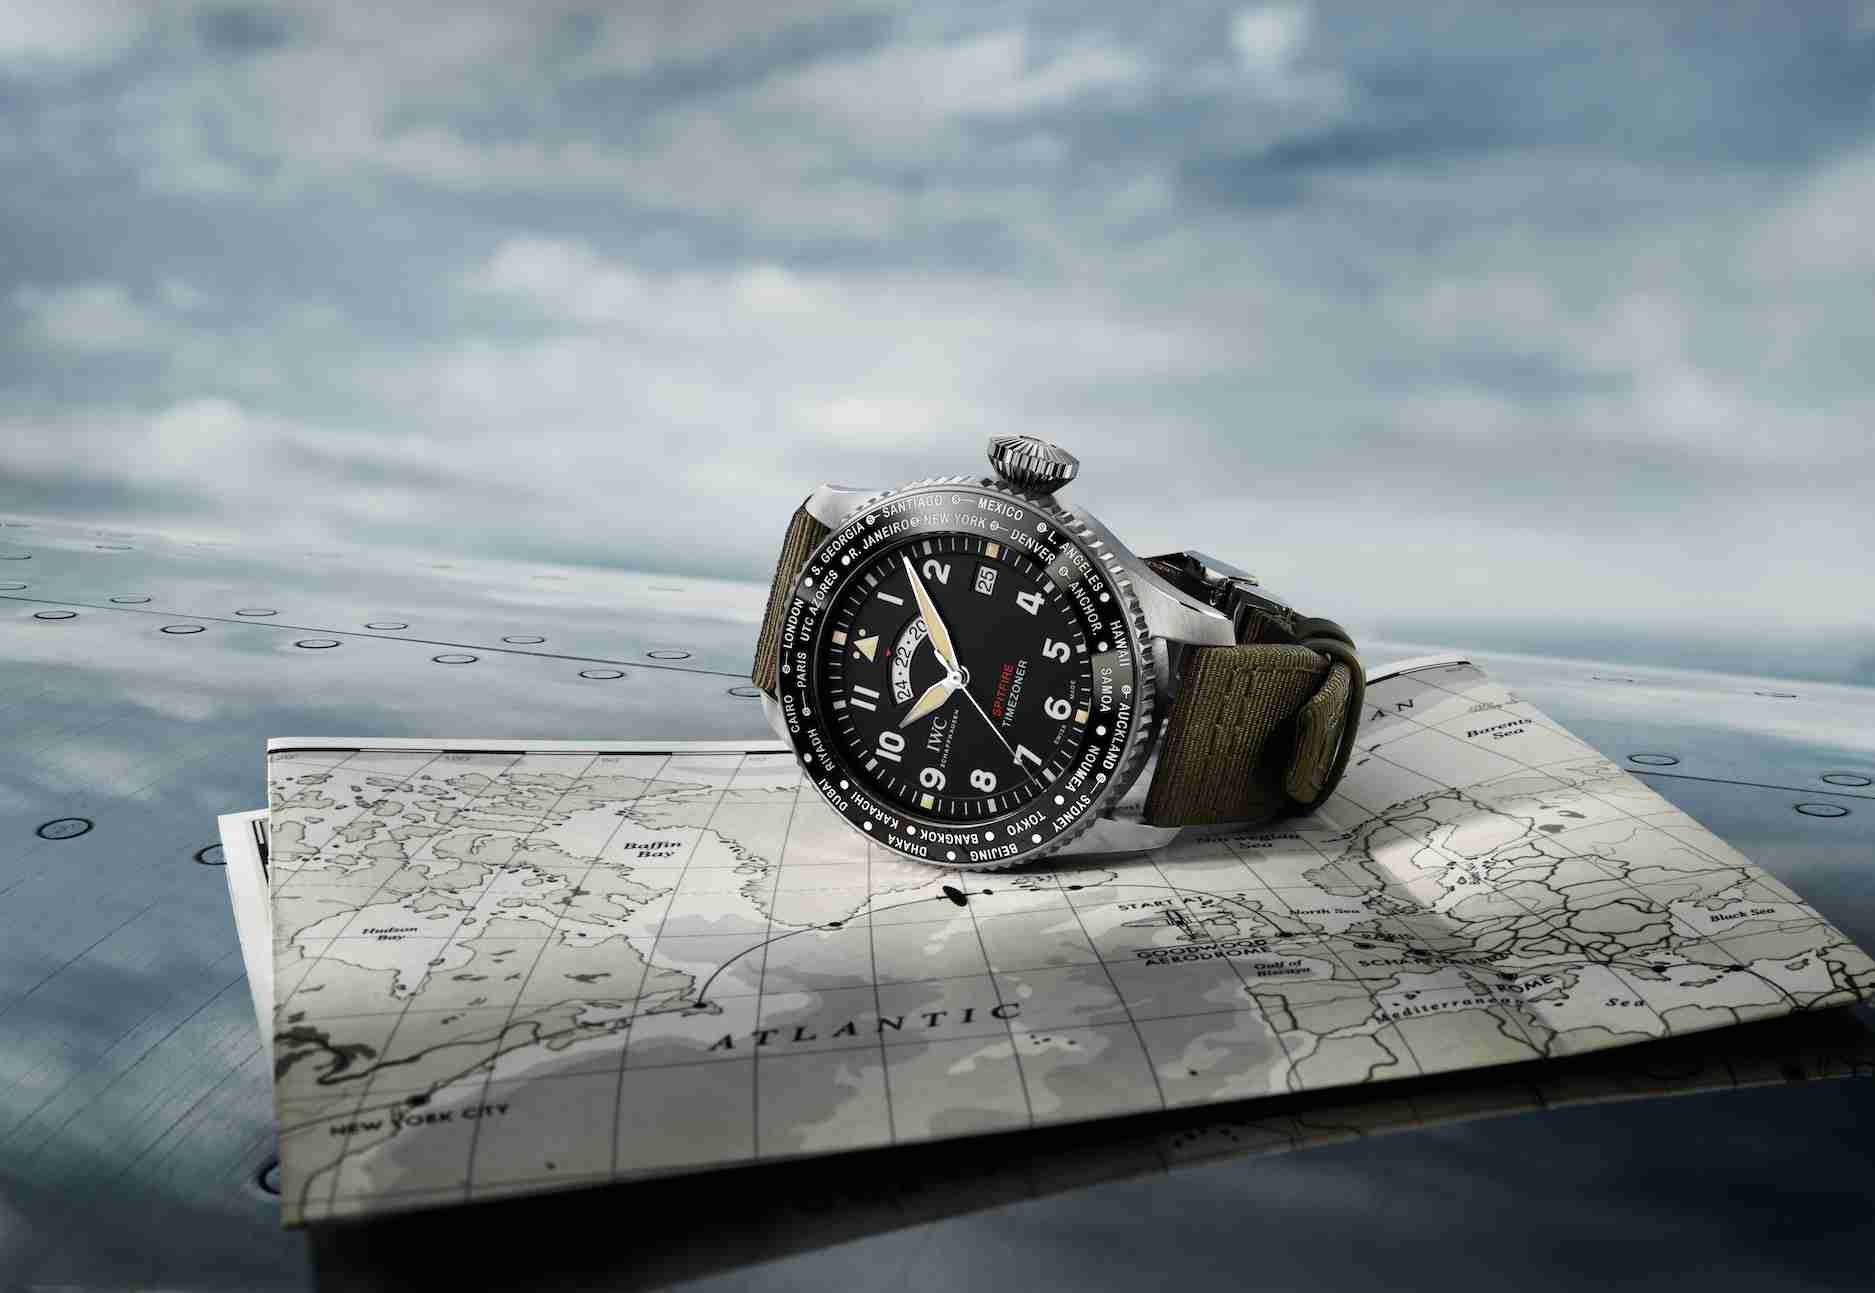 The Spitfire Plane And IWC Pilot's Watch Timezoner Spitfire Edition Replica